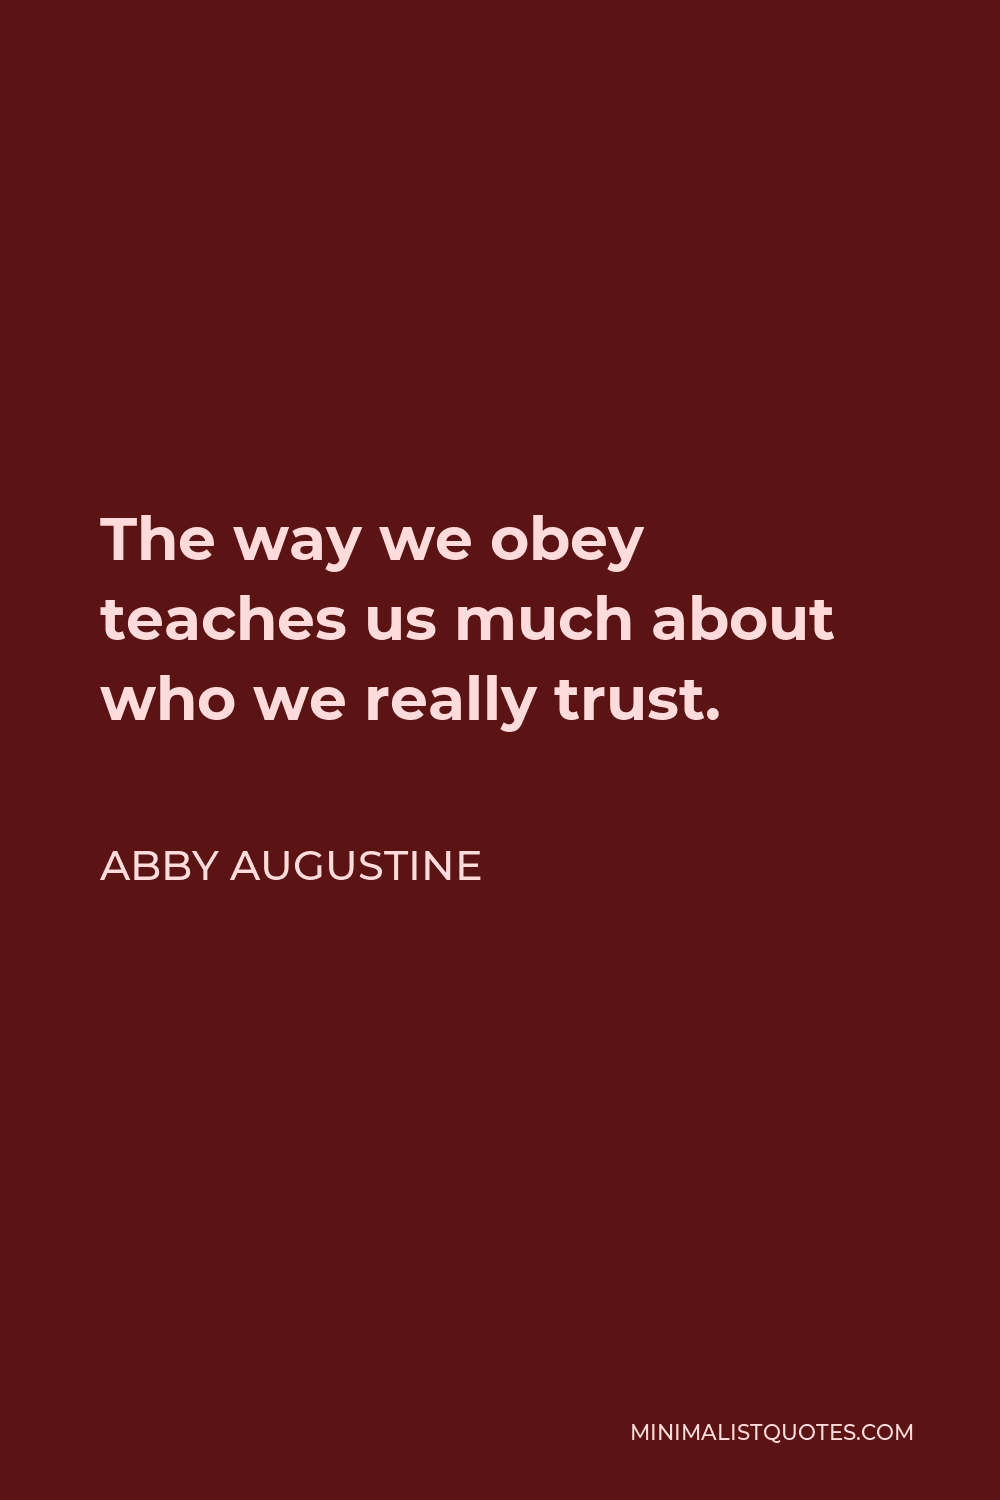 Abby Augustine Quote - The way we obey teaches us much about who we really trust.